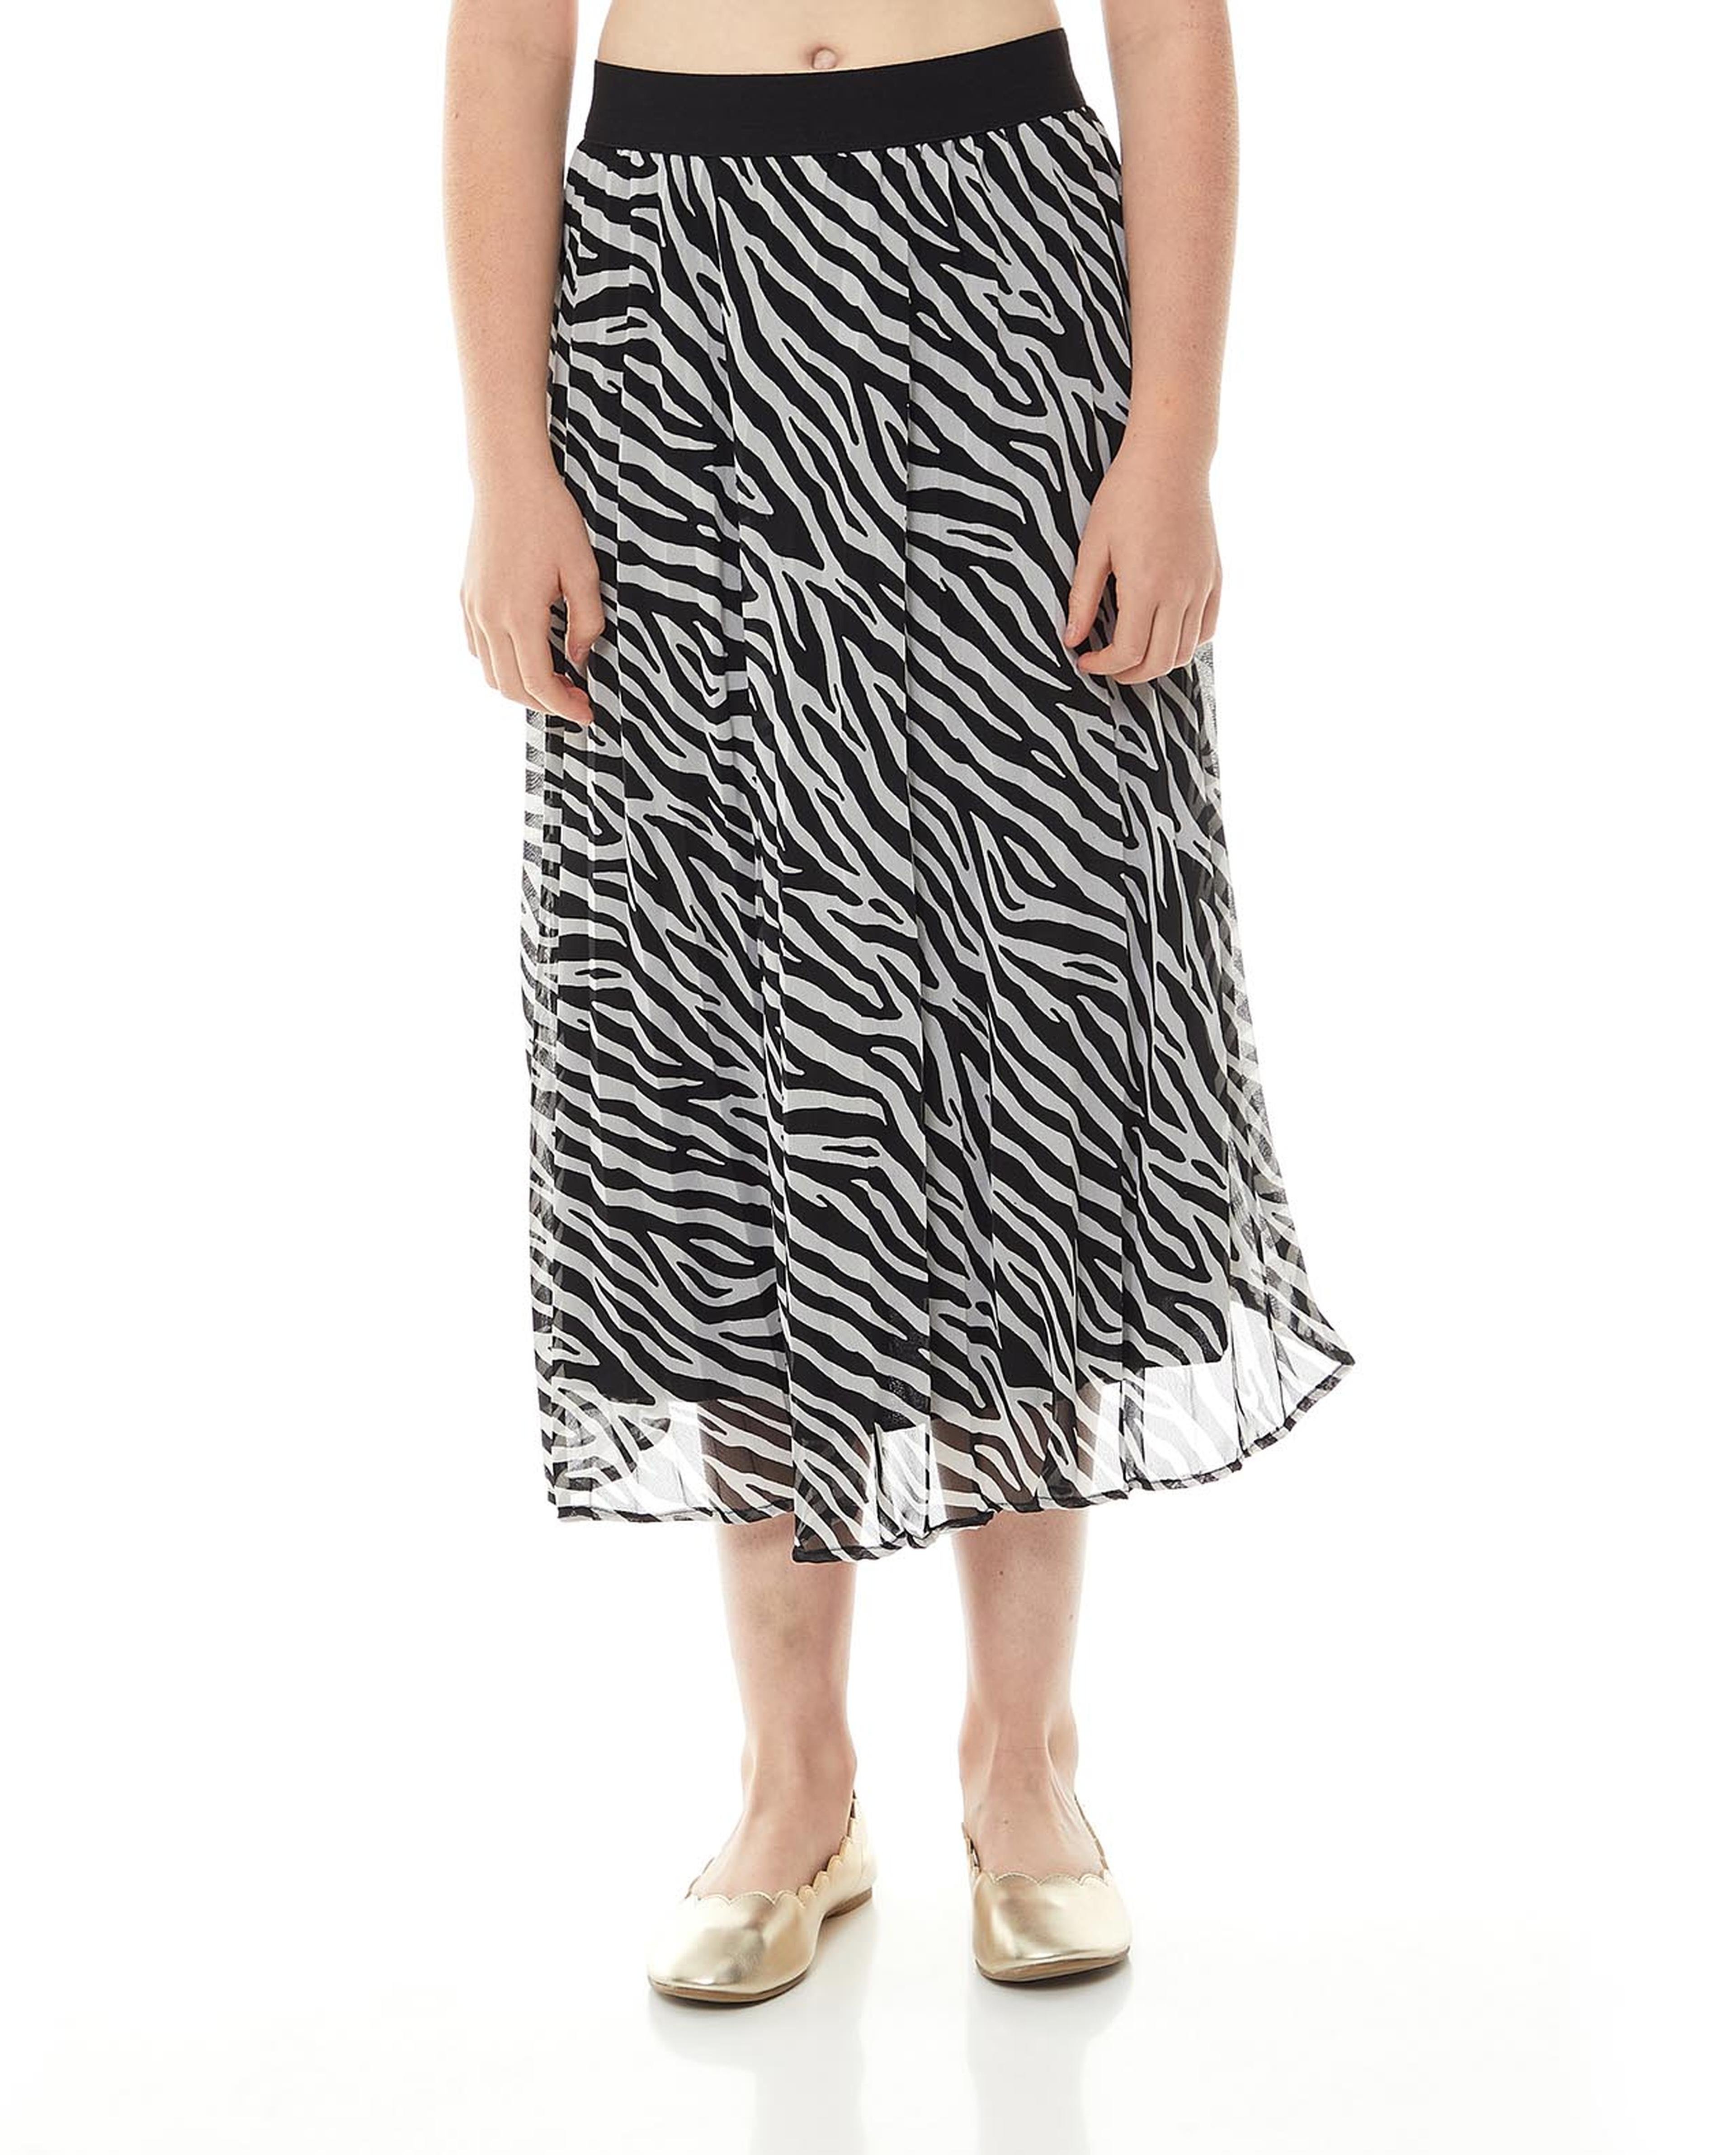 Printed Pleated Skirt with Elastic Waistband